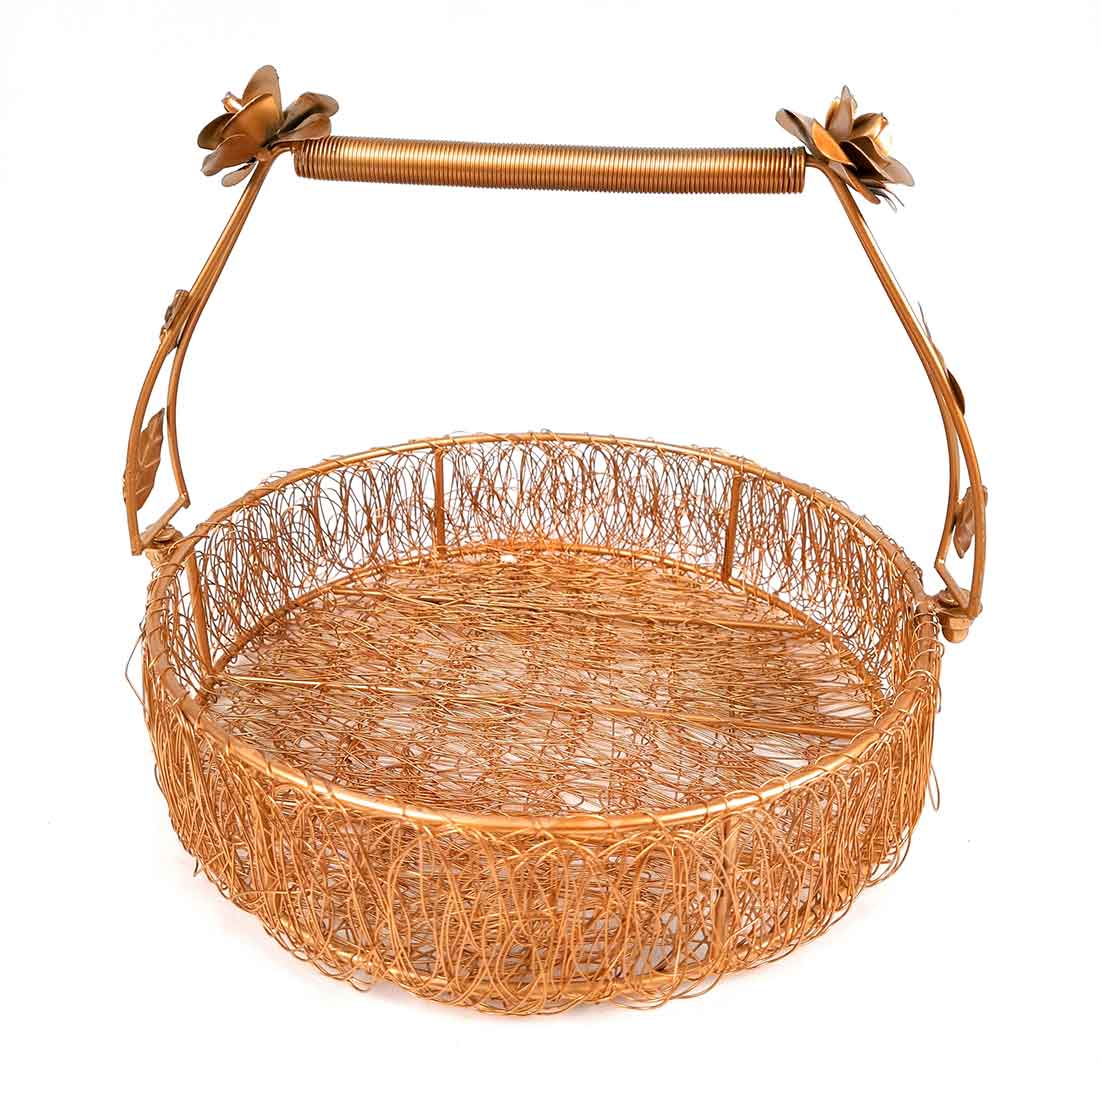 Multi-Purpose Gold Plated Meshwire Basket | Shagun Basket - For Packing & Serving Fruits, Sweets & Gifts - 11 Inch - Apkamart